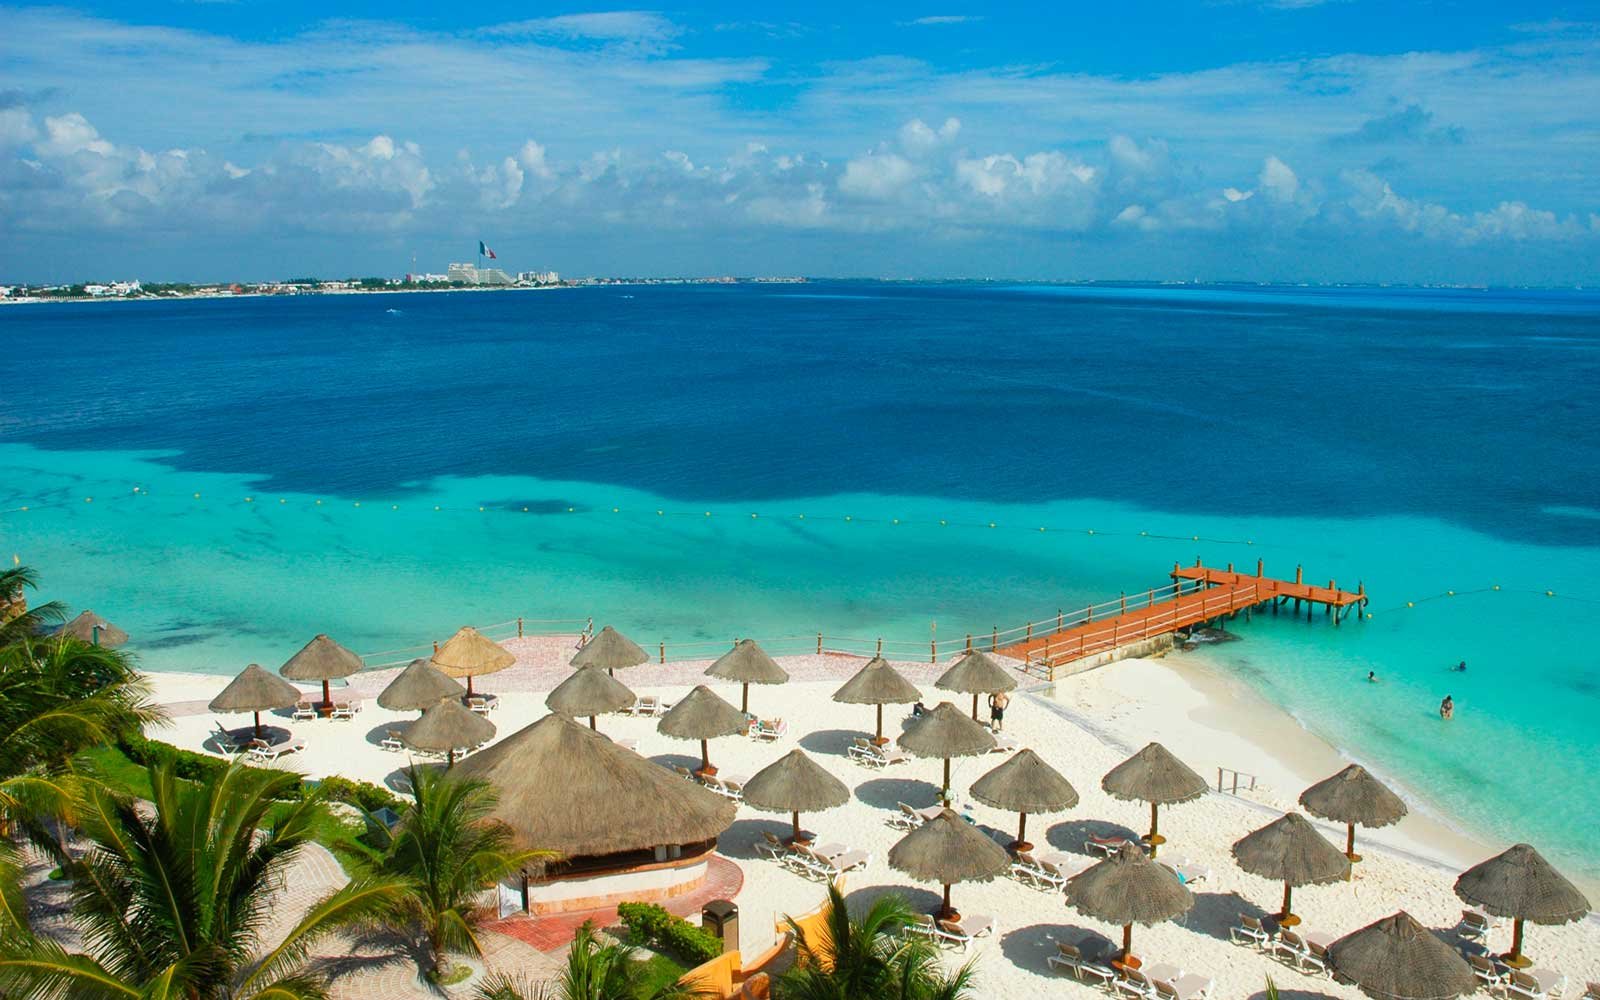 Denver to Cancun Mexico $219 RT Airfares on Frontier Airlines (Travel November - January 2023)